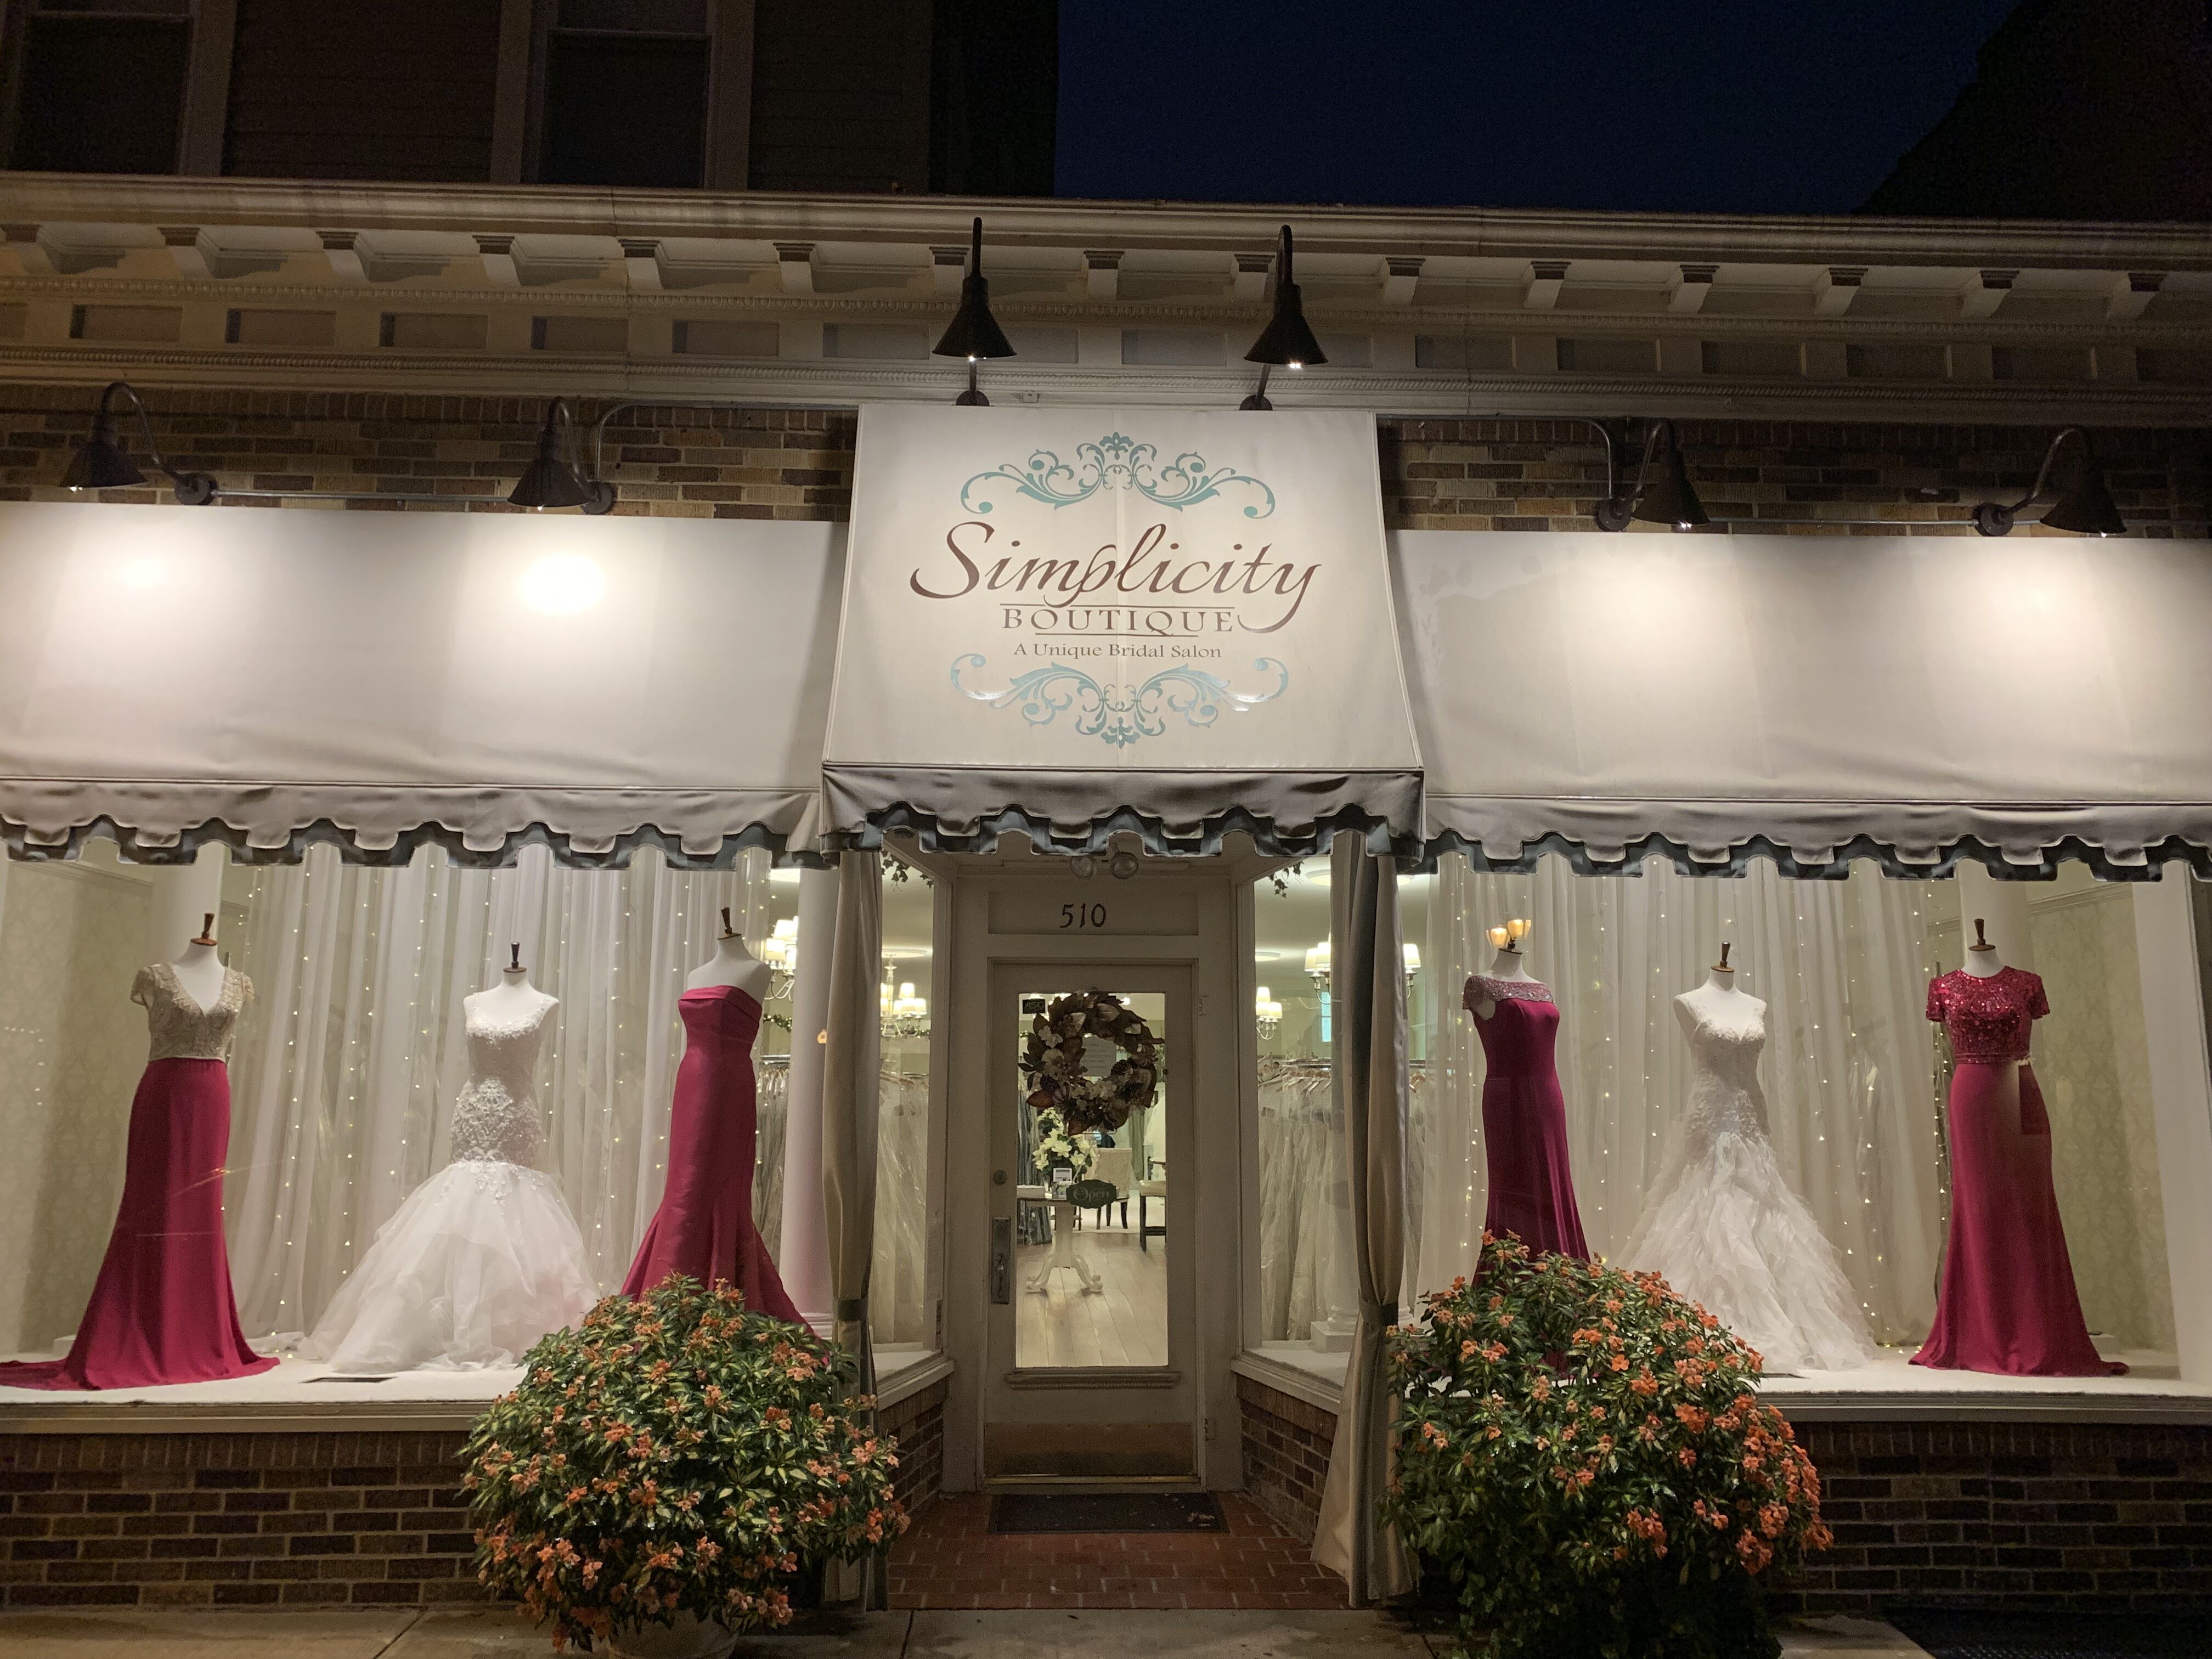 Simplicity Boutique Bridal Salons Haddon Heights, NJ